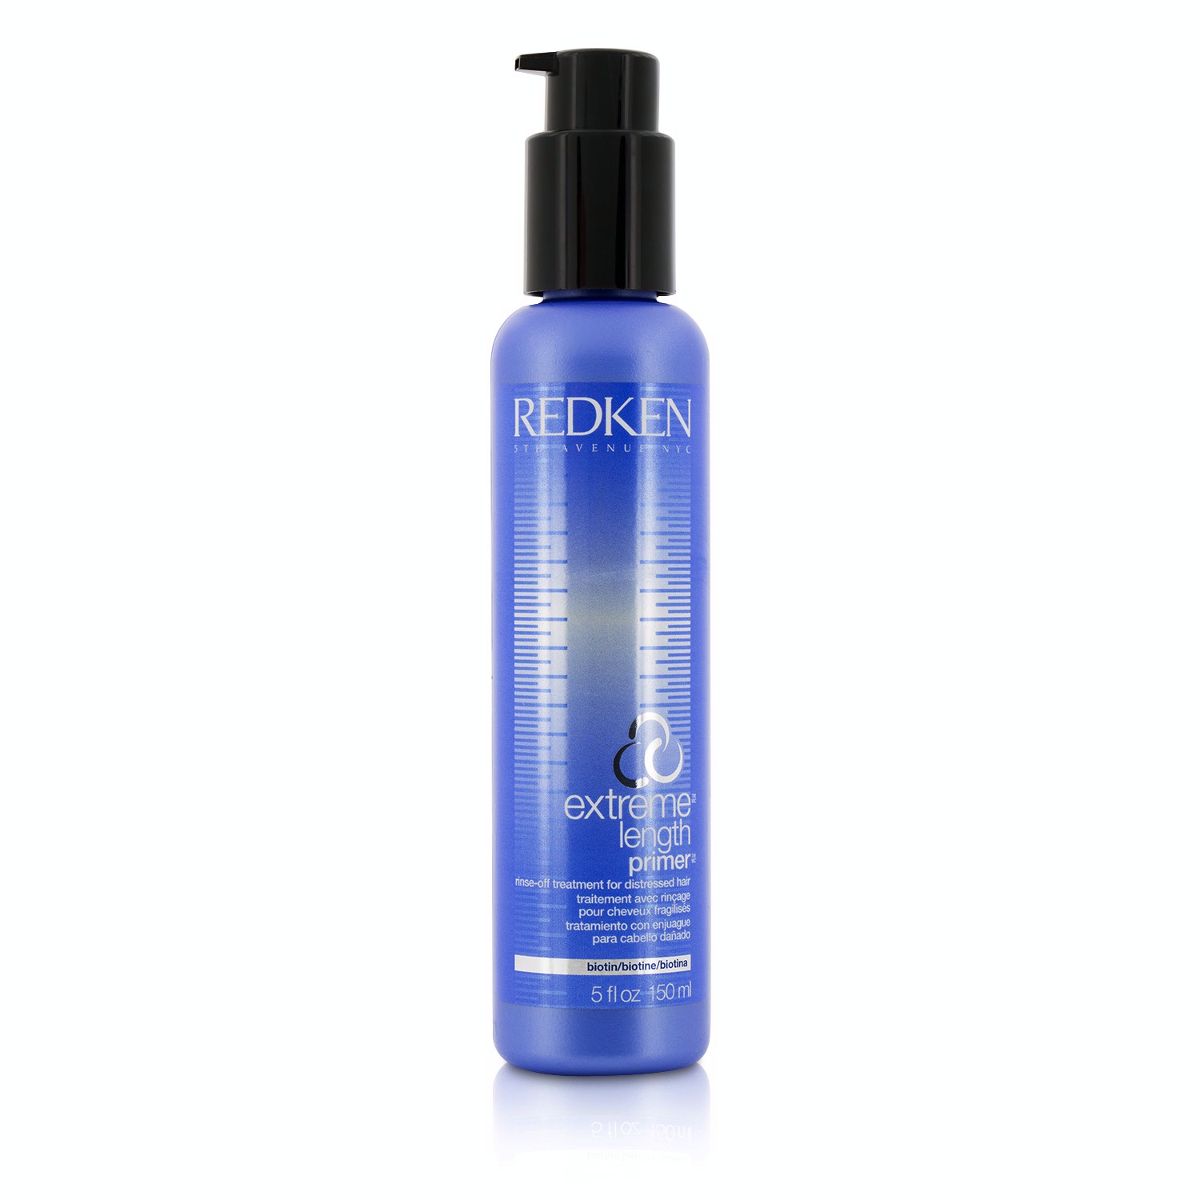 Extreme Length Primer Rinse-Off Treatment (For Distressed Hair) Redken Image